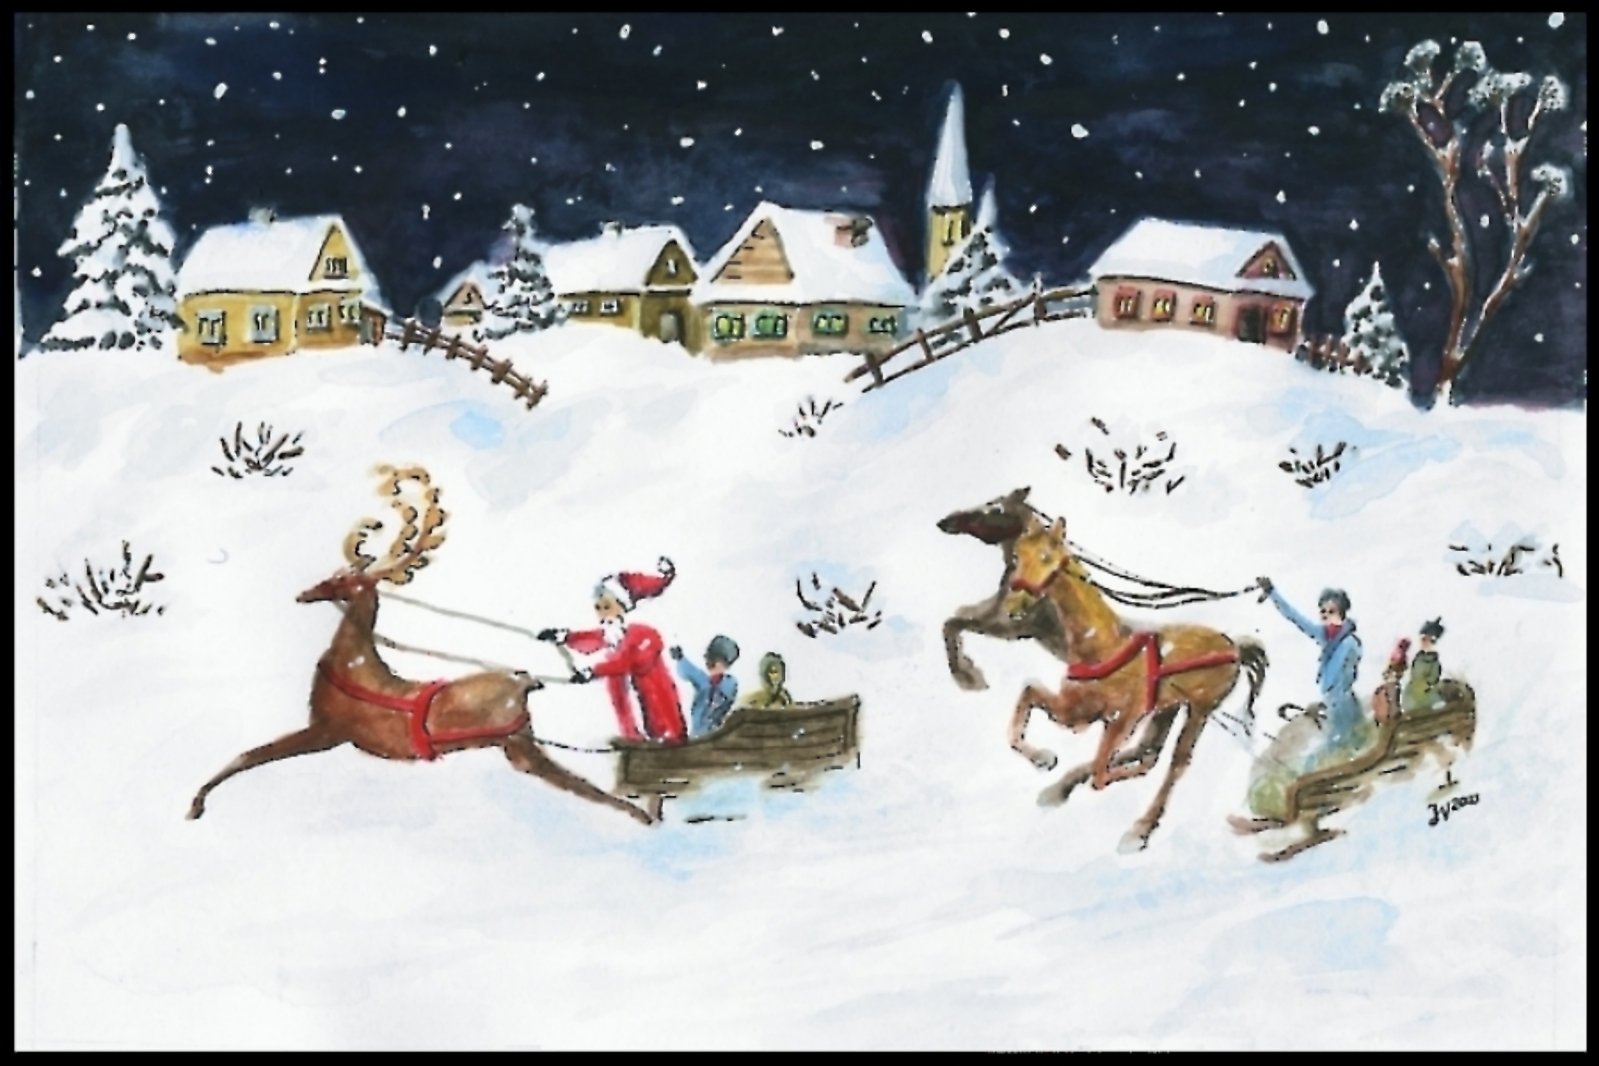 the horse pulling sleigh has a man in it